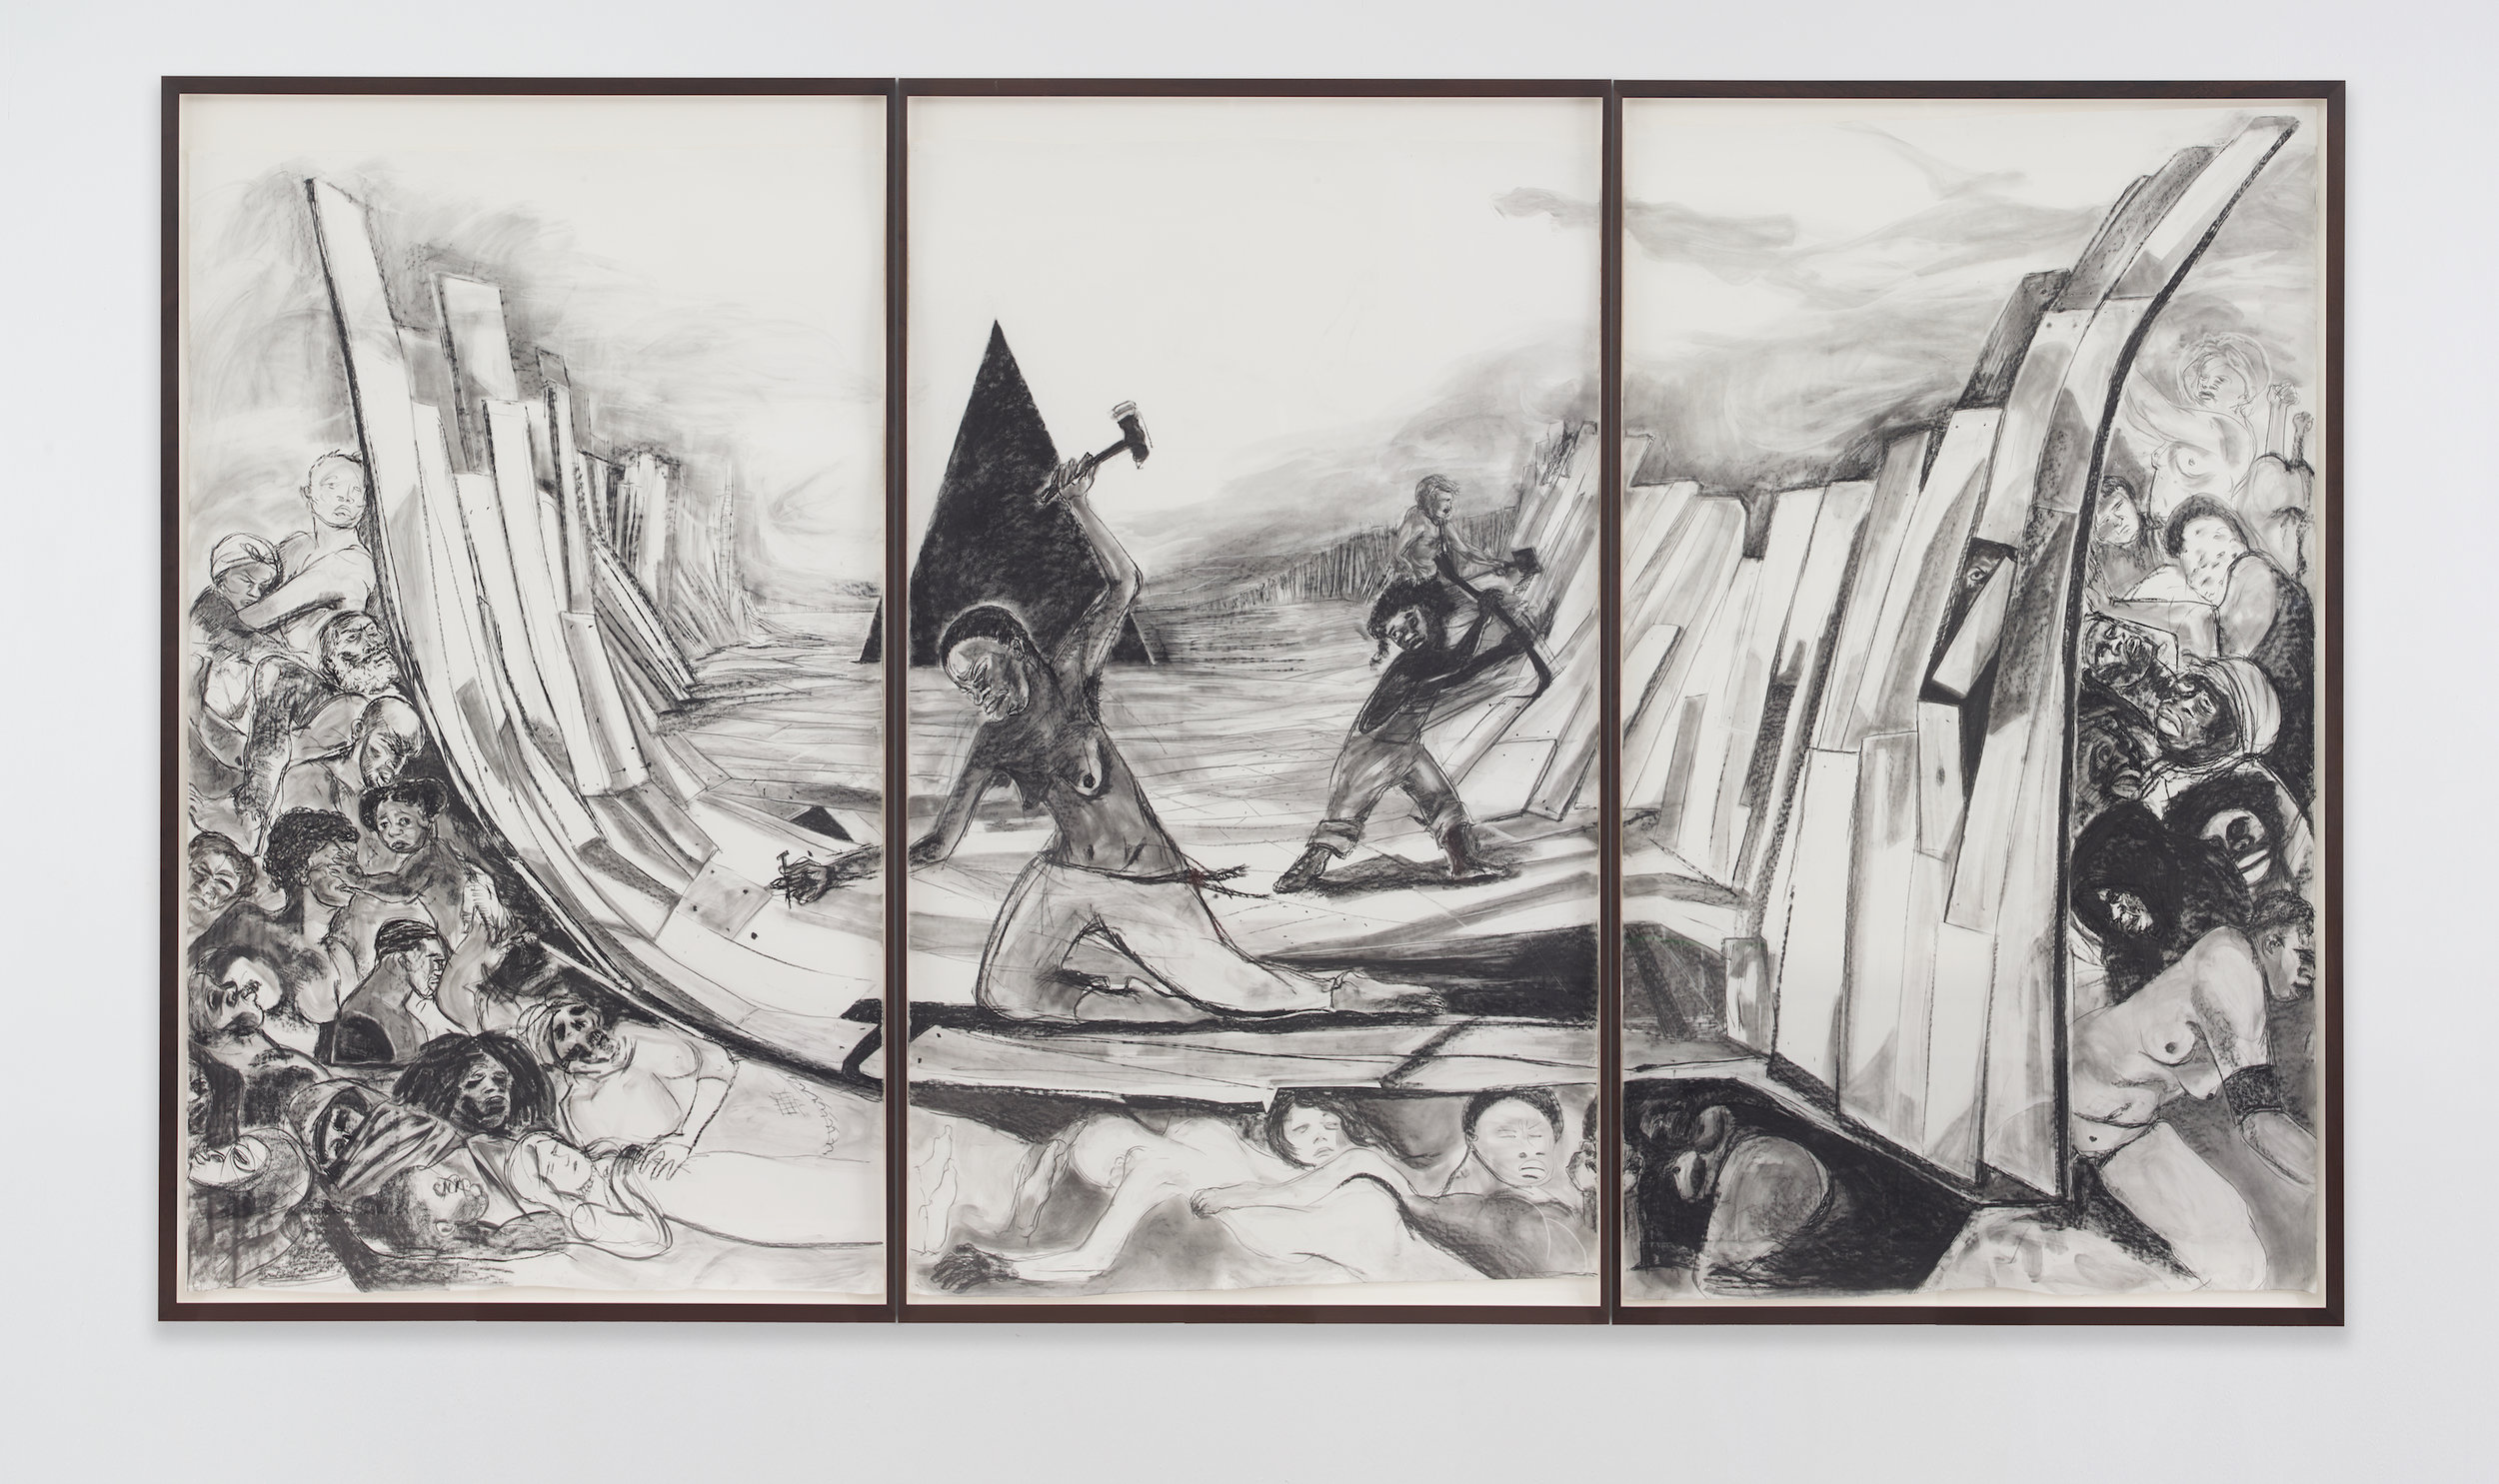  Kara Walker,&nbsp; Securing a Motherland Should Have Been Sufficient , 2016. Graphite lumber marker on paper,&nbsp;104.5 x 180.75 inches. 